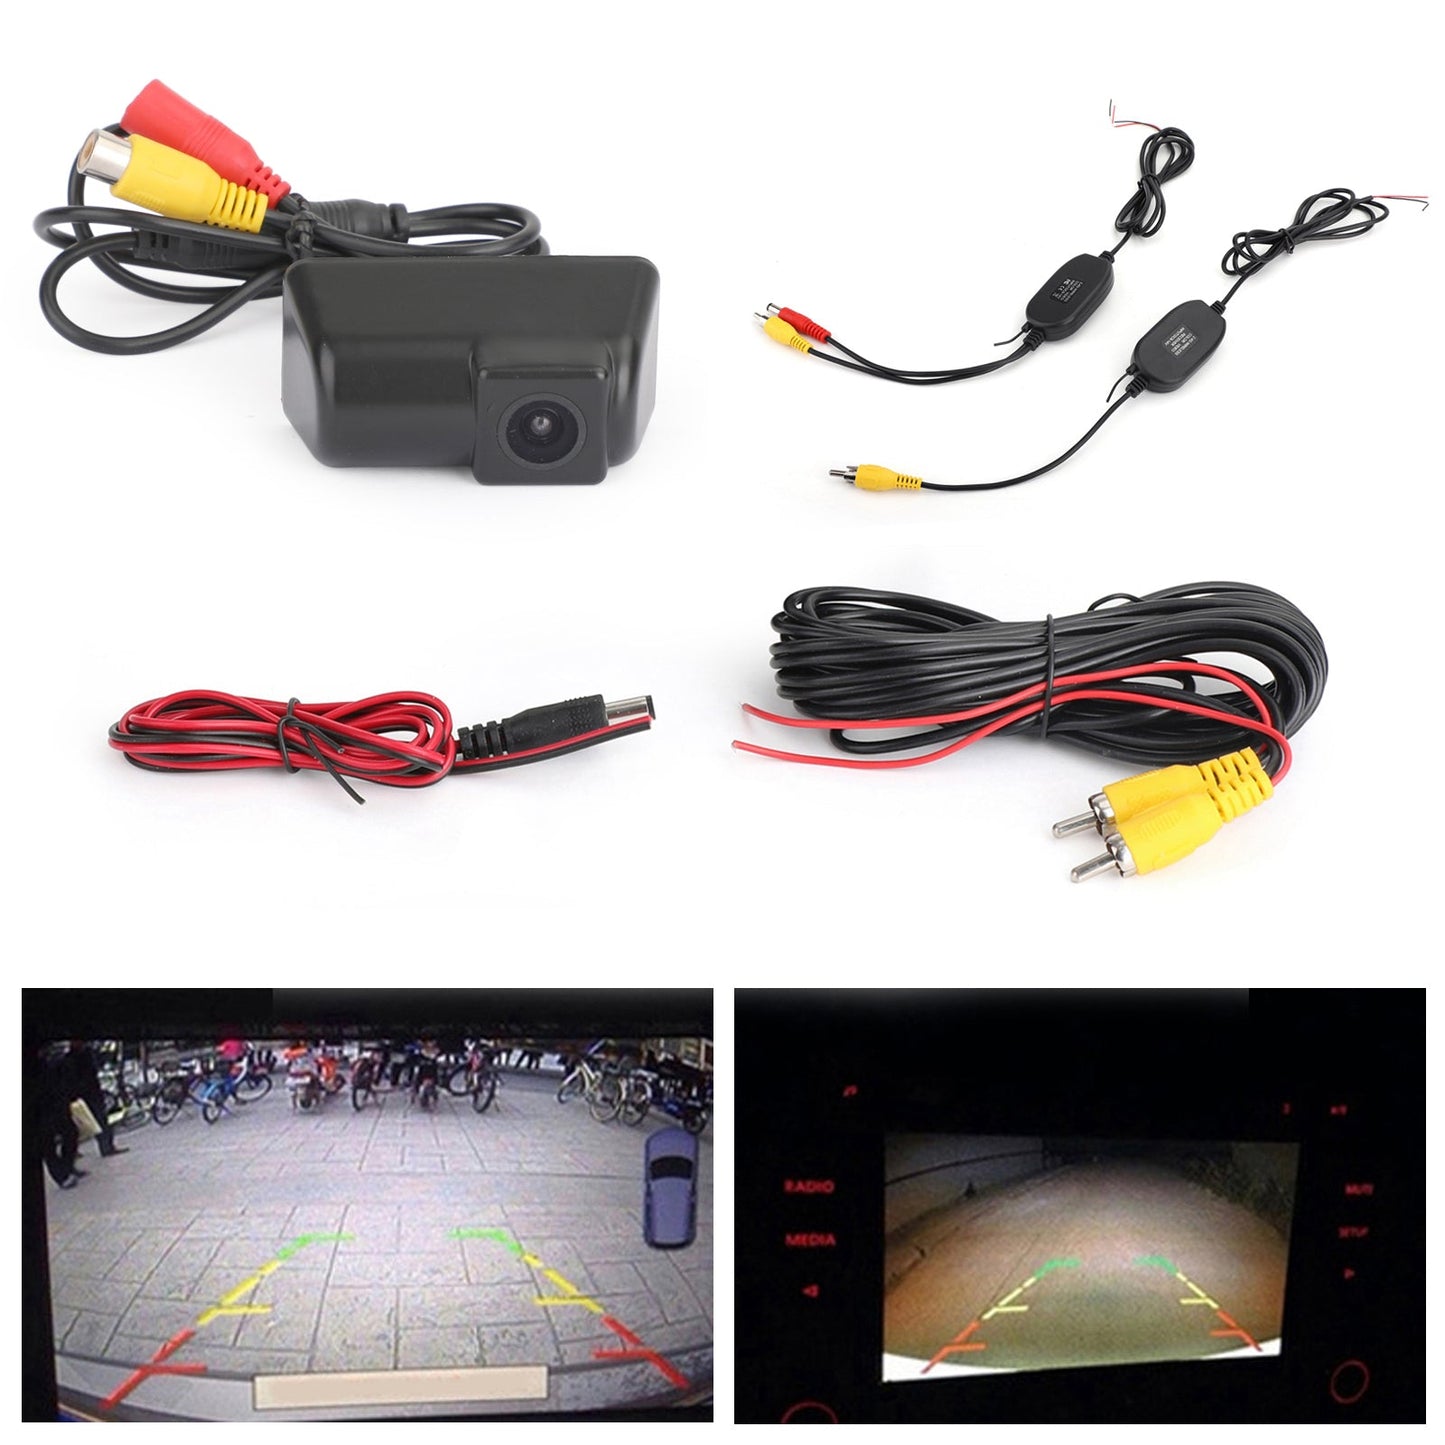 Reverse Backup CDD Waterproof HD Wireless Camera Kit for Ford /Transit /Connect